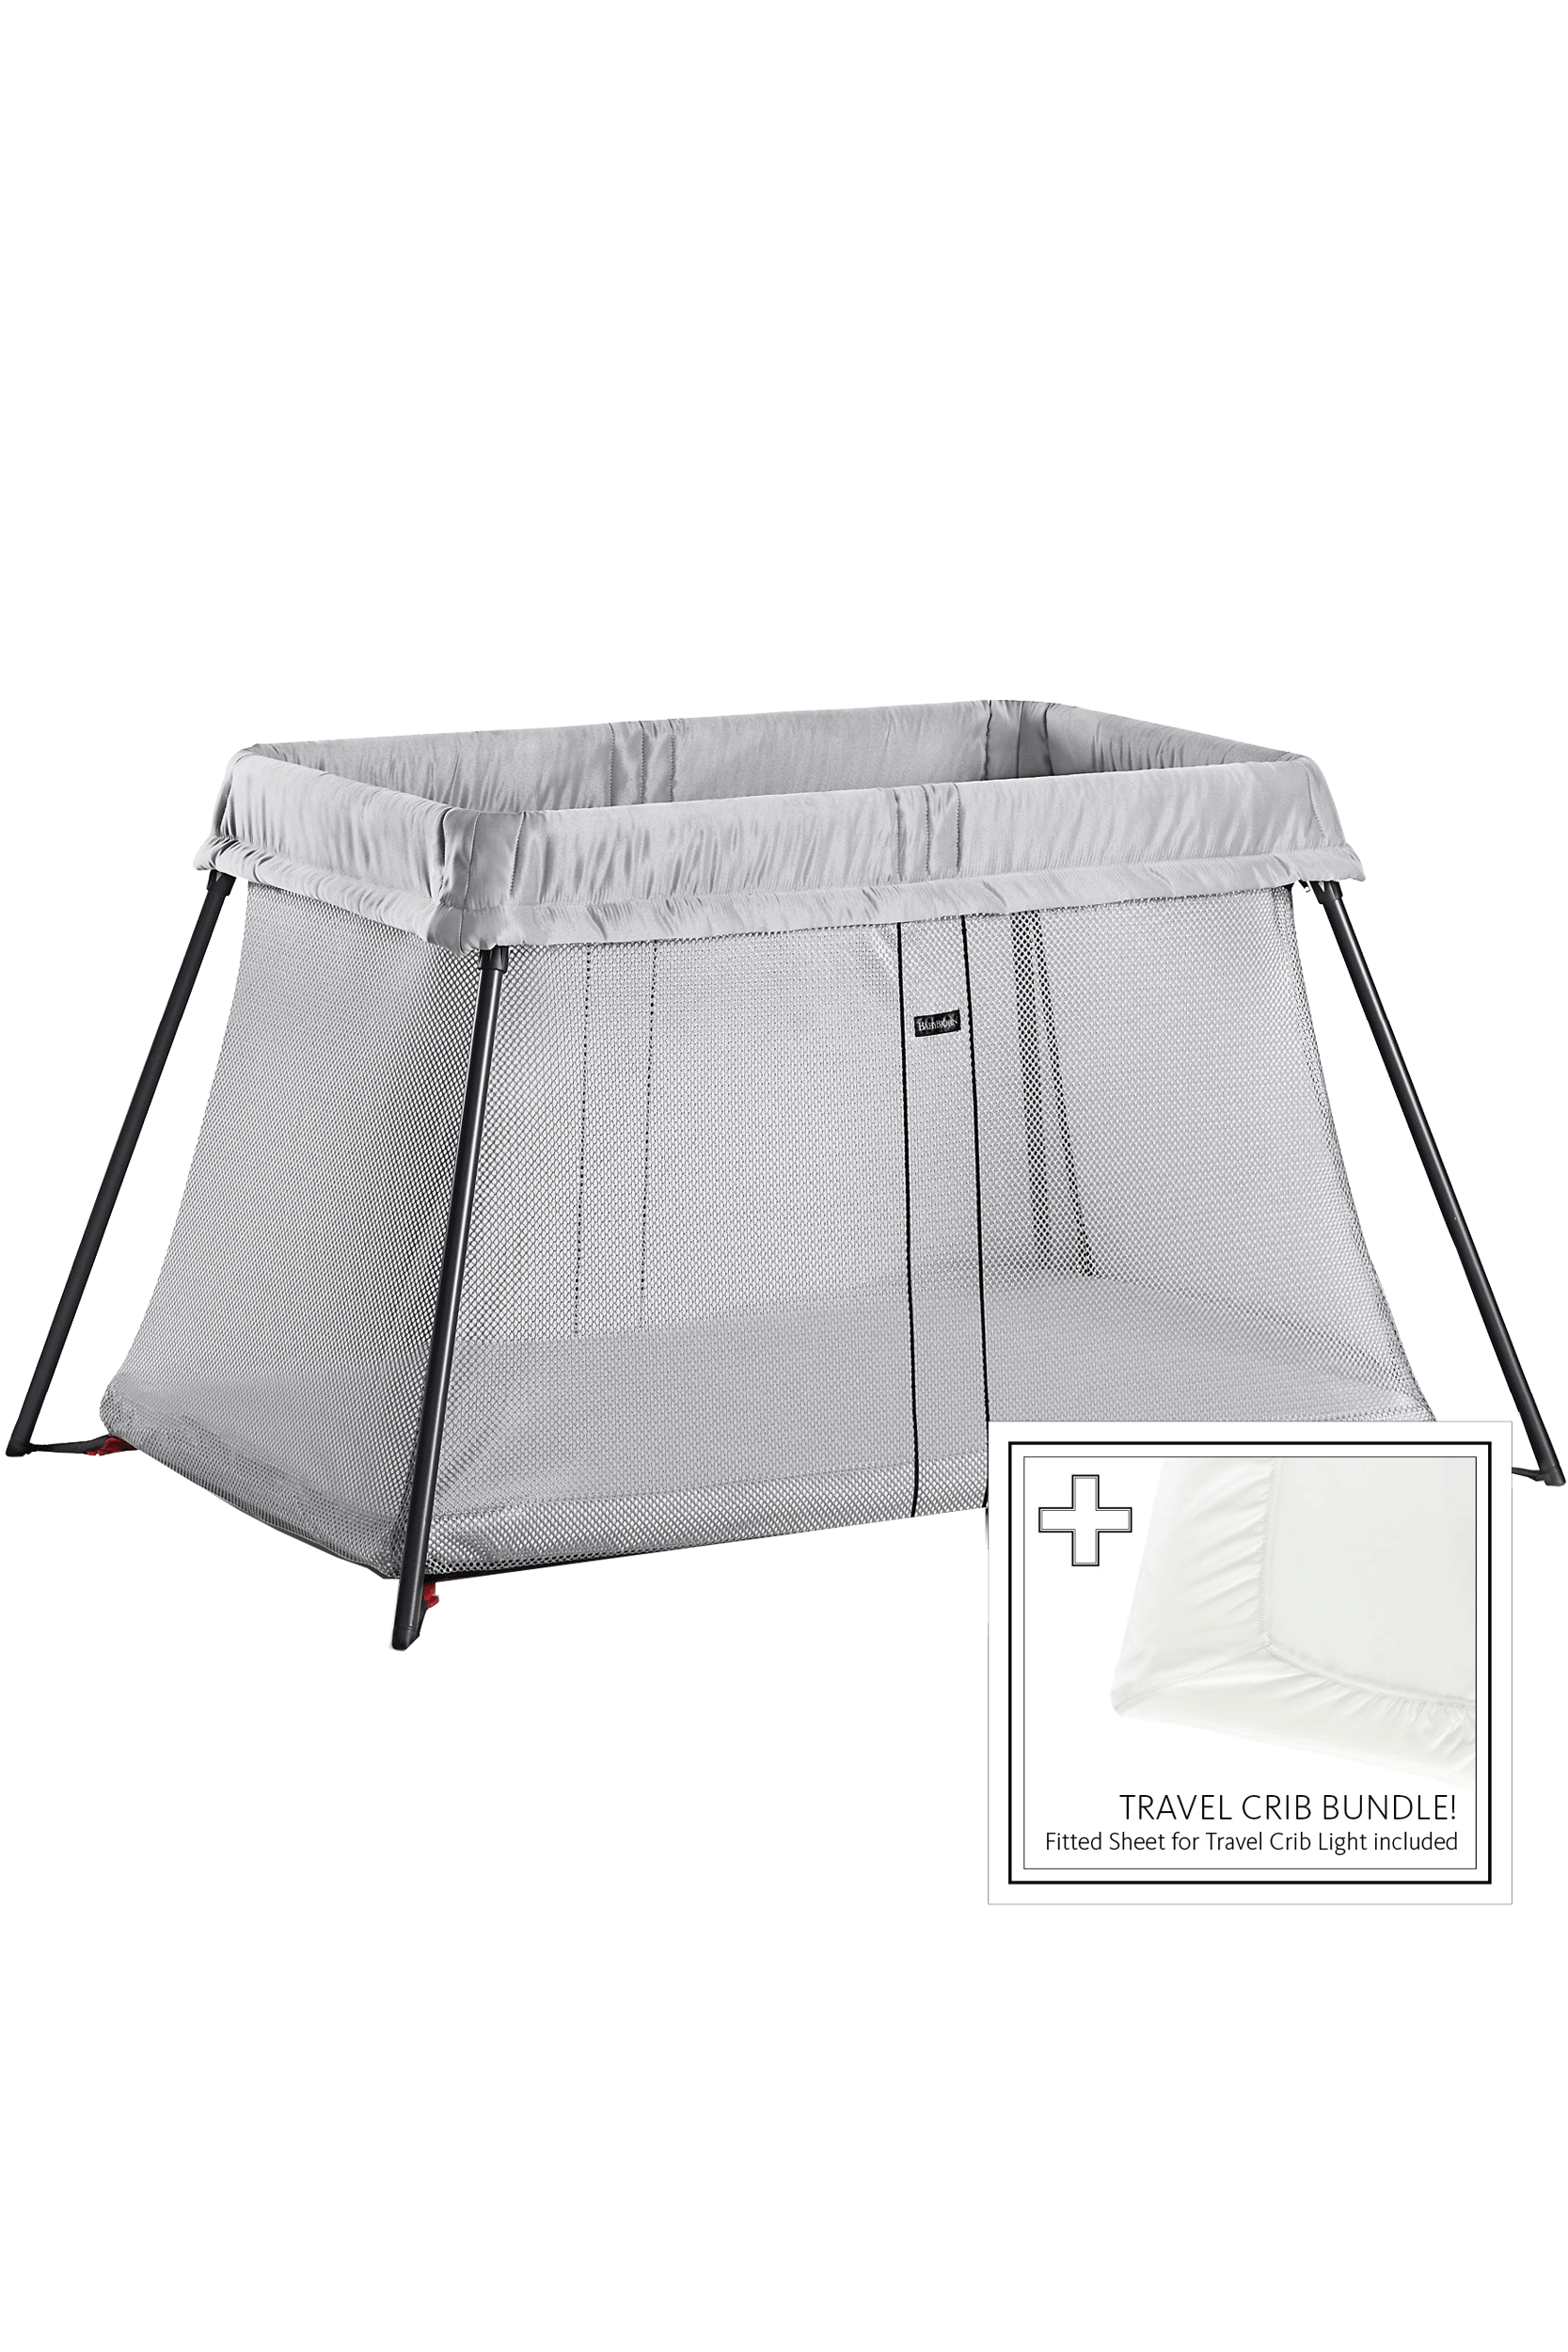 BabyBjorn Silver BabyBjorn Travel Crib Light in Silver with Fitted Sheet